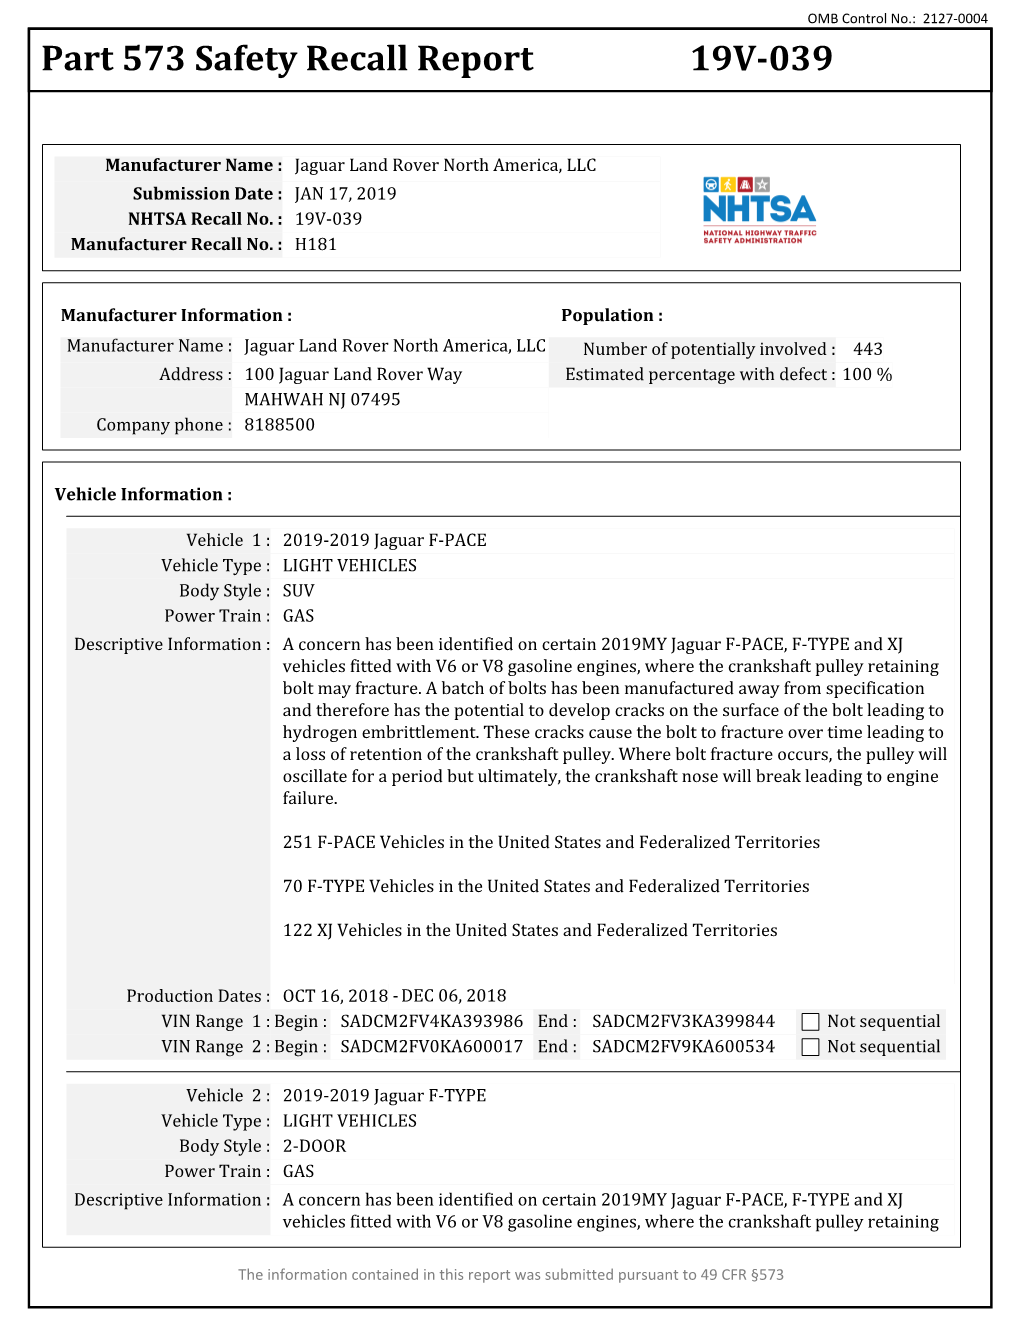 Part 573 Safety Recall Report 19V-039